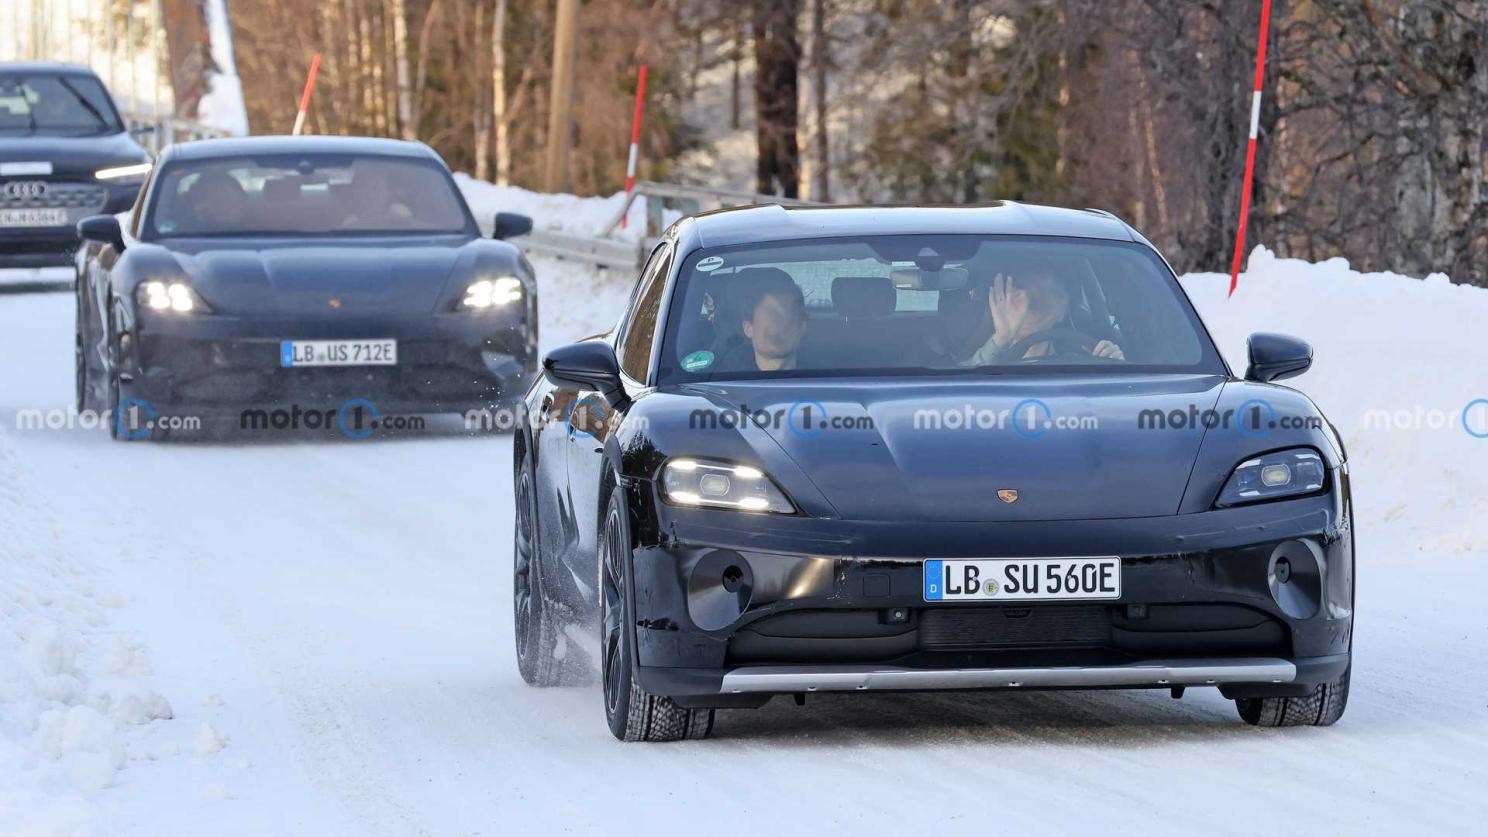 Mid-term facelift Porsche Taycan family spy shots exposed, estimated to be launched at the end of this year.